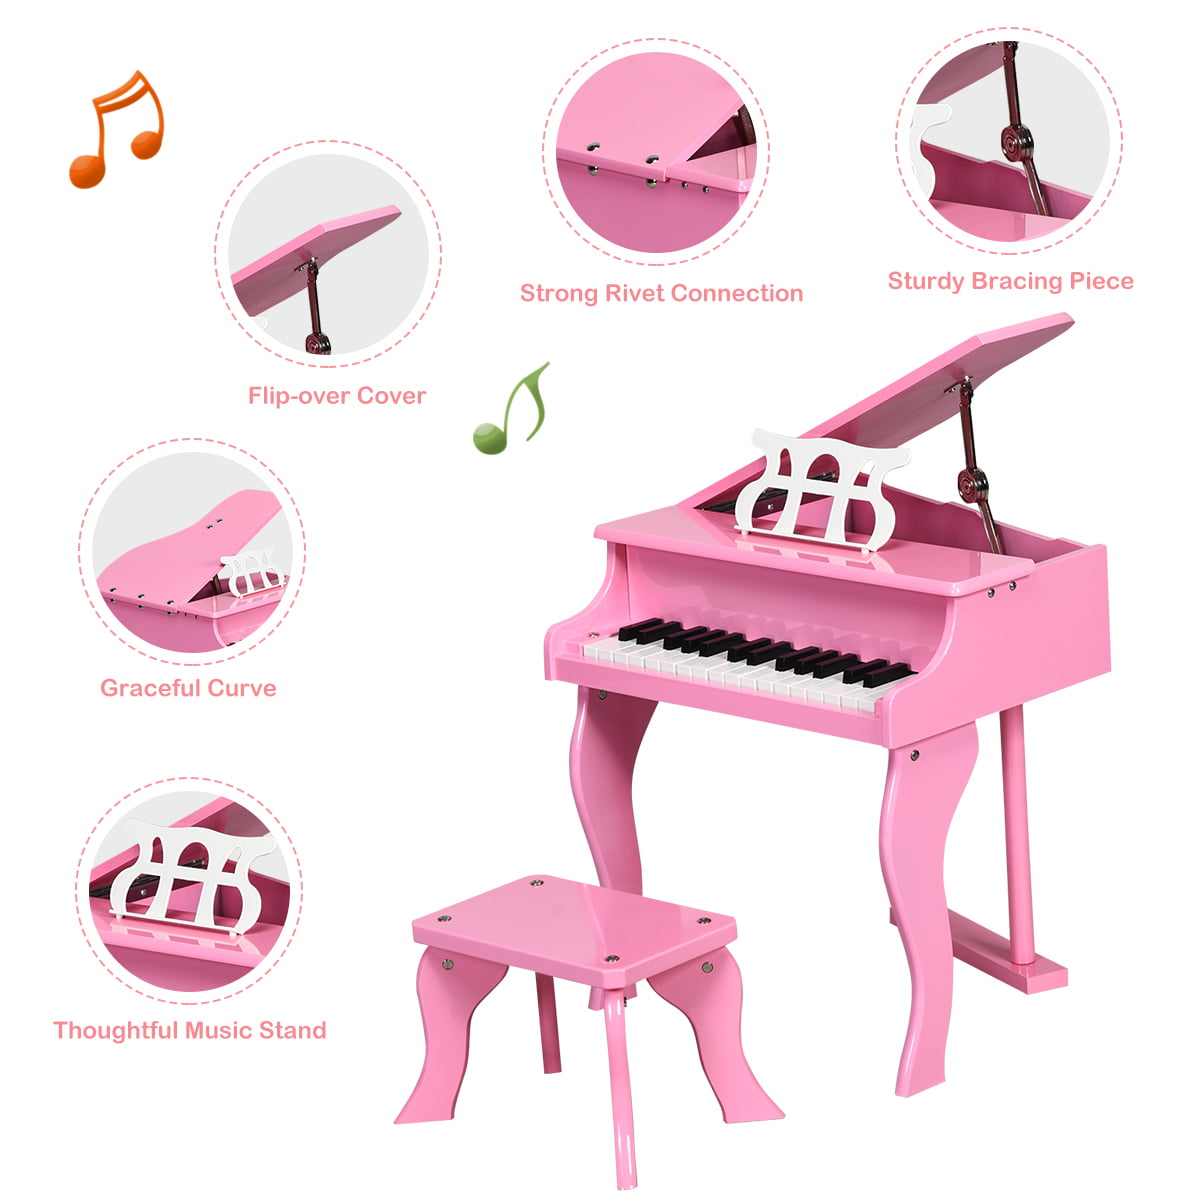 COSTWAY Classic Wooden Kids Piano Curved Legs Learn-to-Play Musical Instrument Toy with Music Rack Black 30-Key Mini Baby Grand Piano with Bench Black/Pink for Boys and Girls Piano Lid 